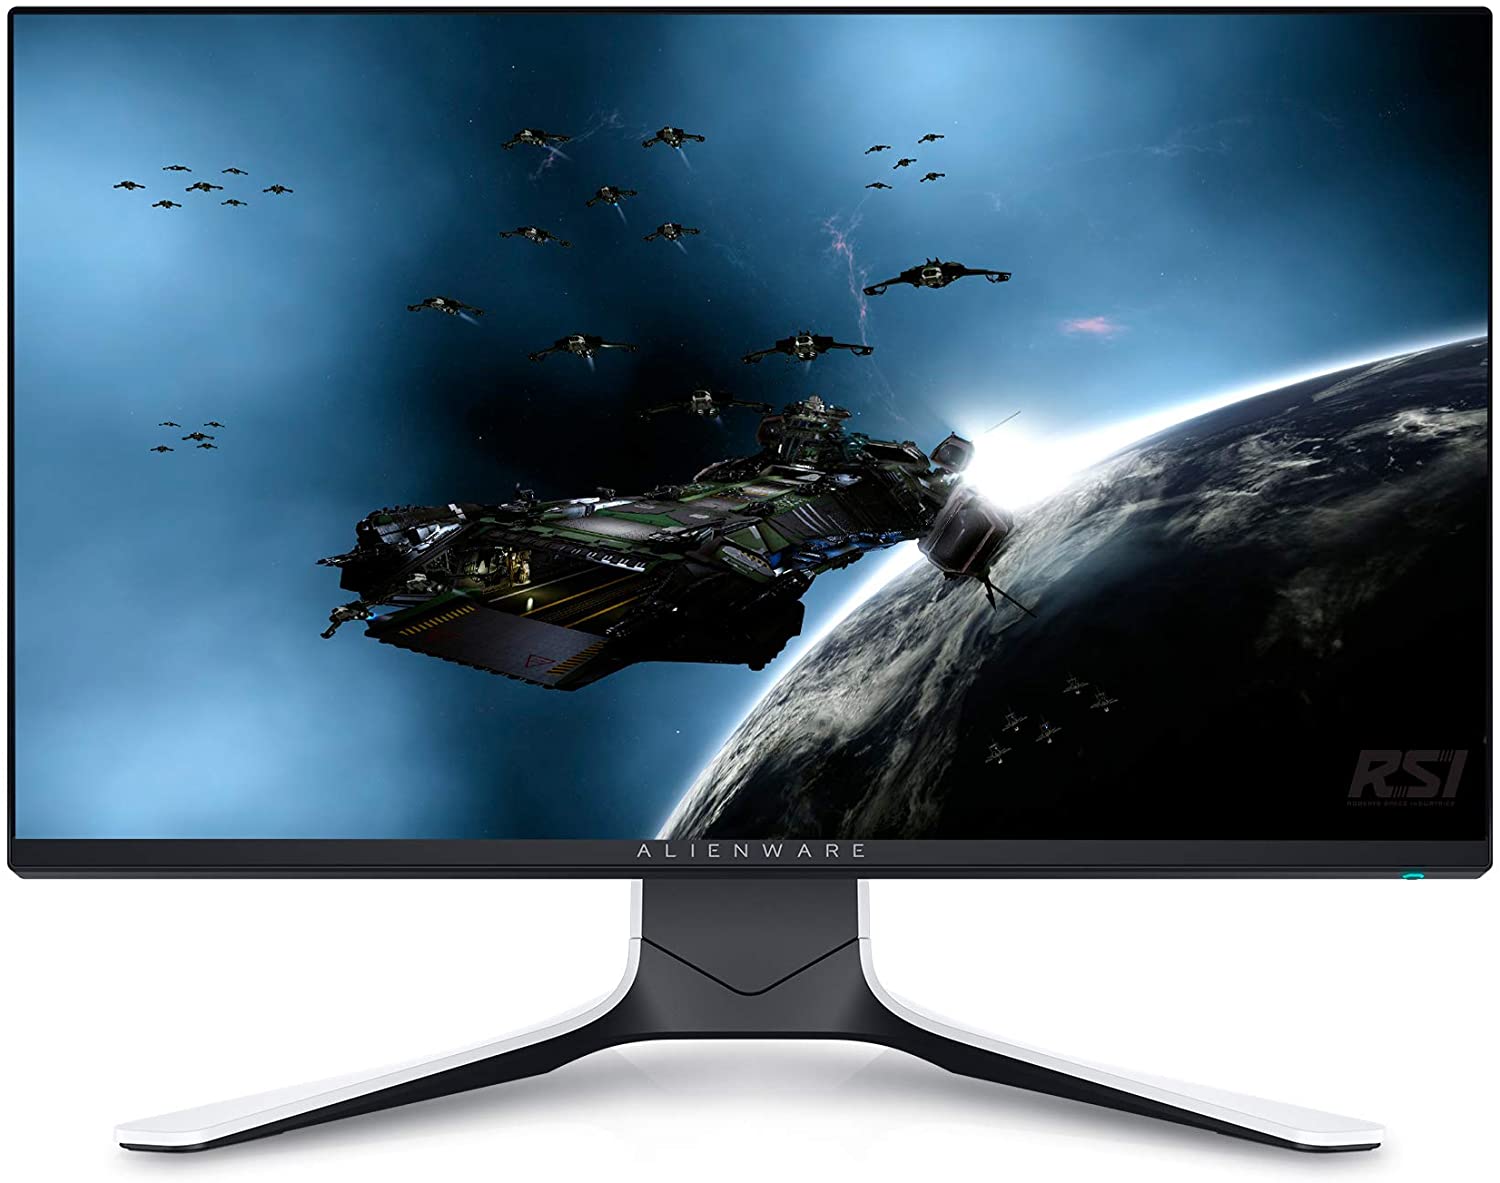 Monitor led dell alienware aw2521hfla 24.5